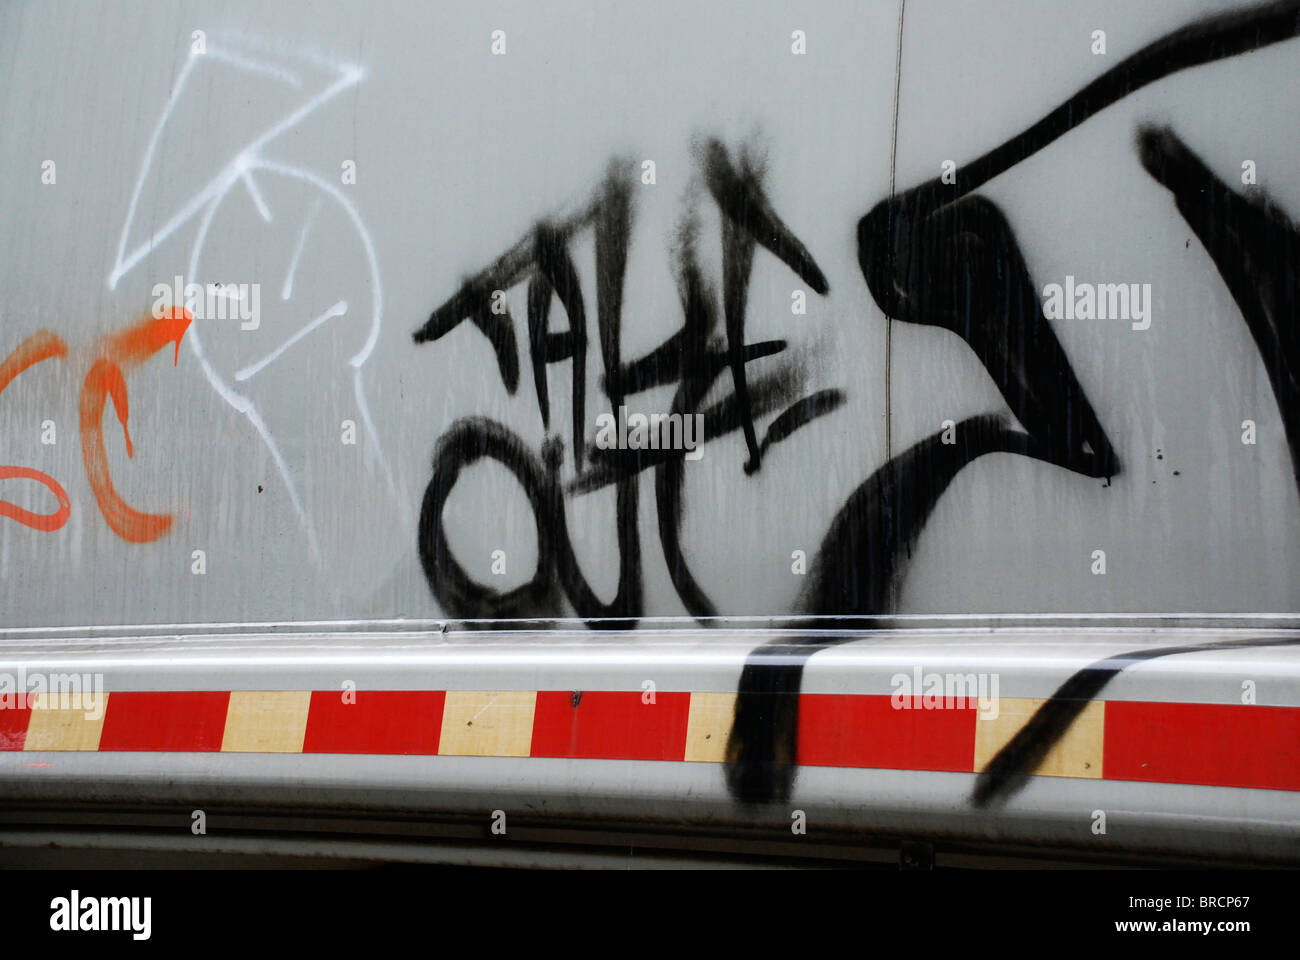 Graffiti on freight car in rail yard in Vancouver BC British Columbia Canad Stock Photo